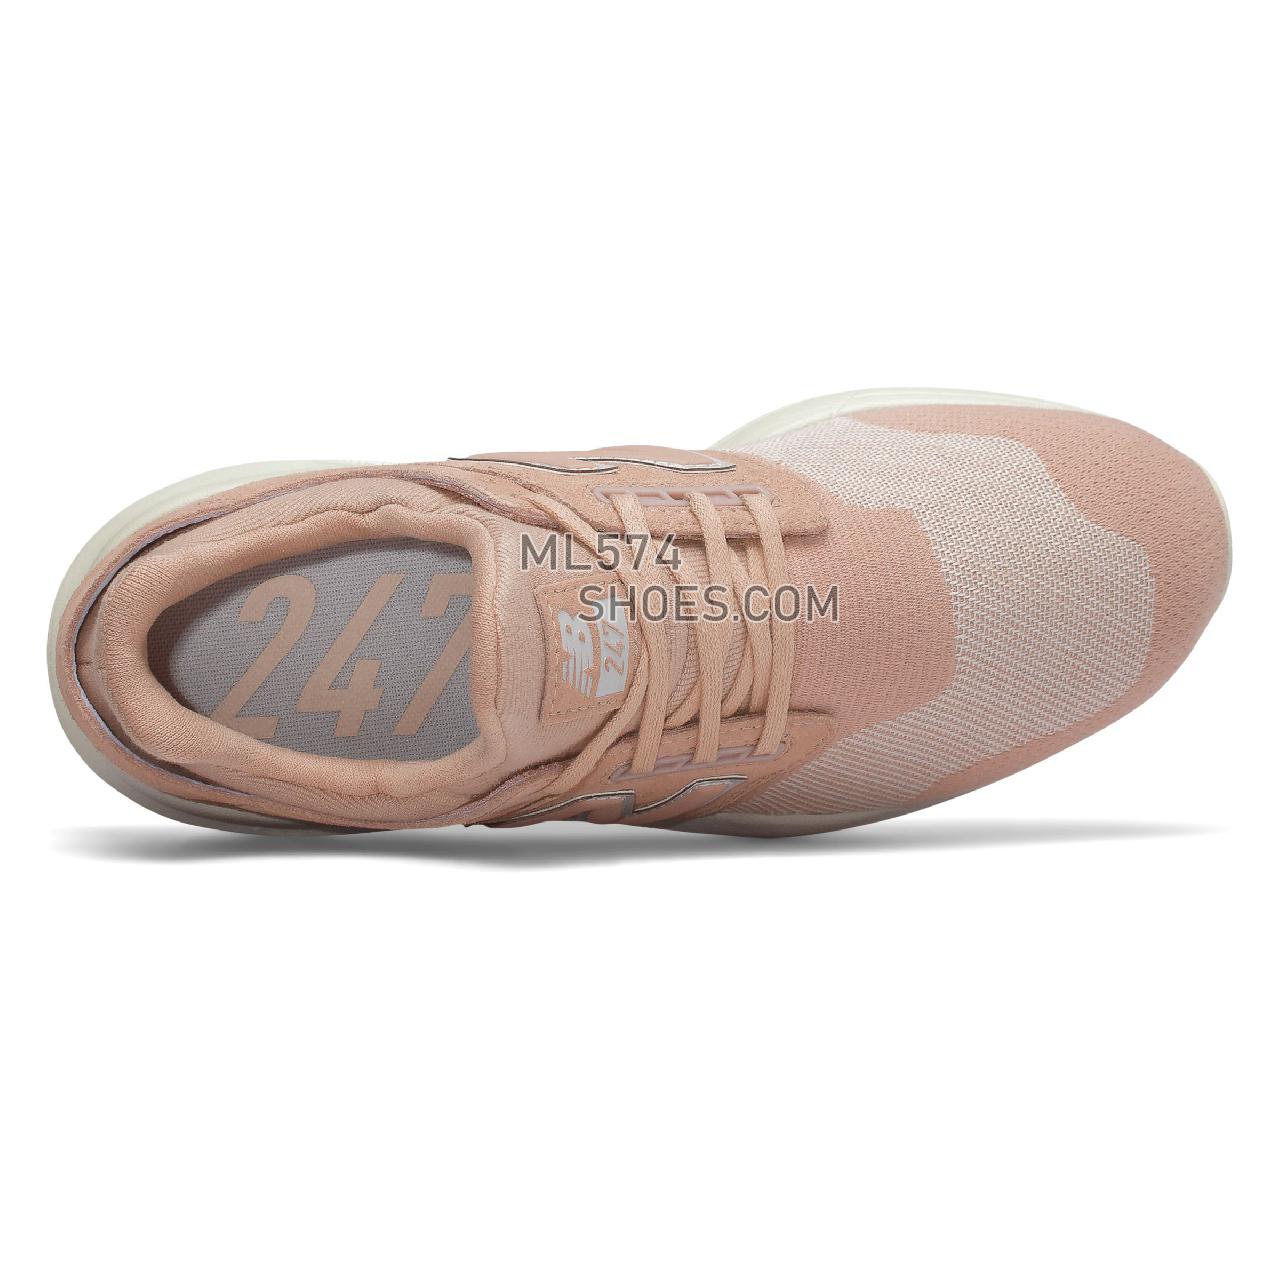 New Balance 247 - Women's Sport Style Sneakers - Pink Sand with Moonbeam - WS247HPC